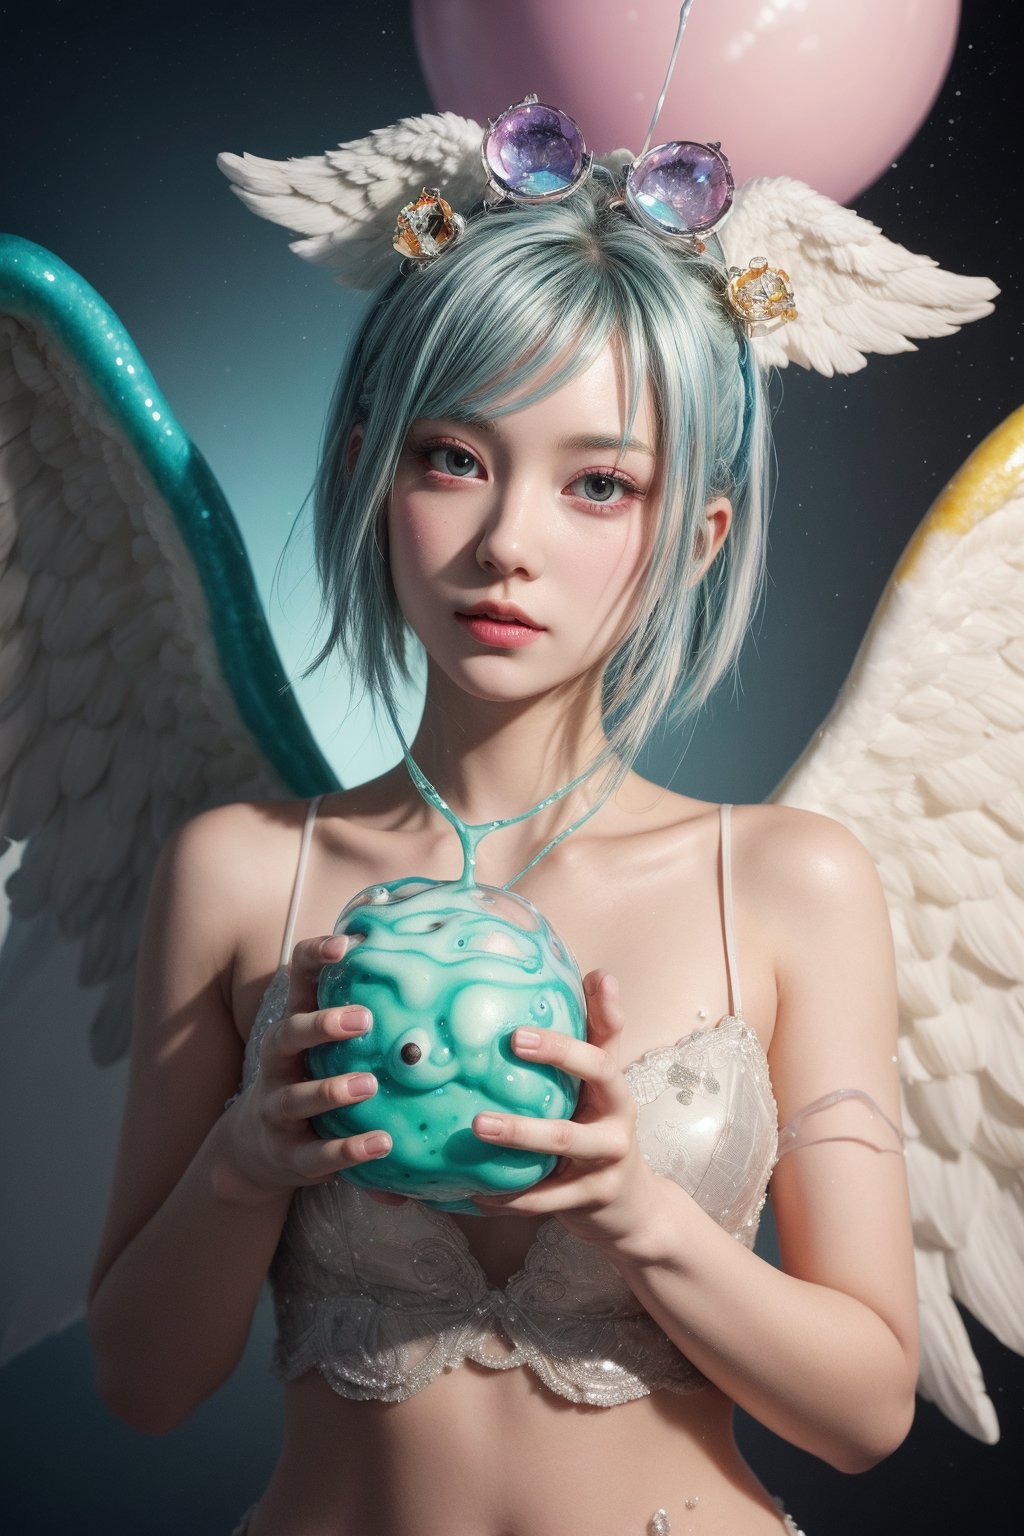 melting anorexic pastel cute slimy group of slime angel jesters,religious vaporwave decora inspired illustrations,HDR,UHD,8K,best quality,masterpiece,sharp focus,ultra-fine painting,physically-based rendering,